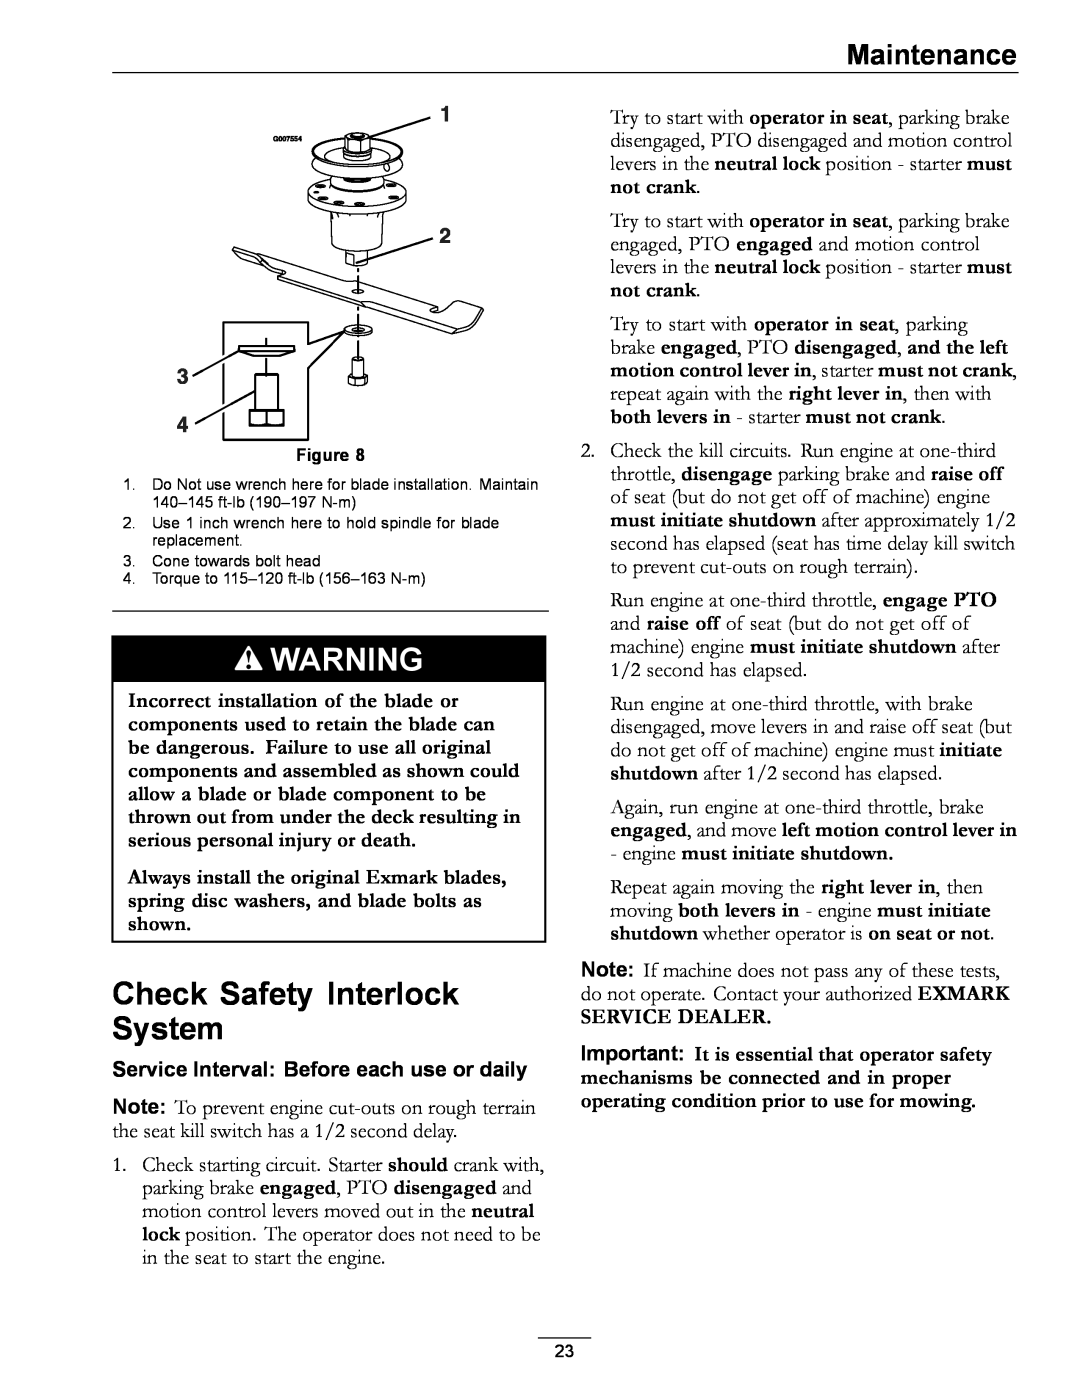 Exmark Phazer manual Check Safety Interlock System, Service Dealer, Maintenance, Service Interval Before each use or daily 